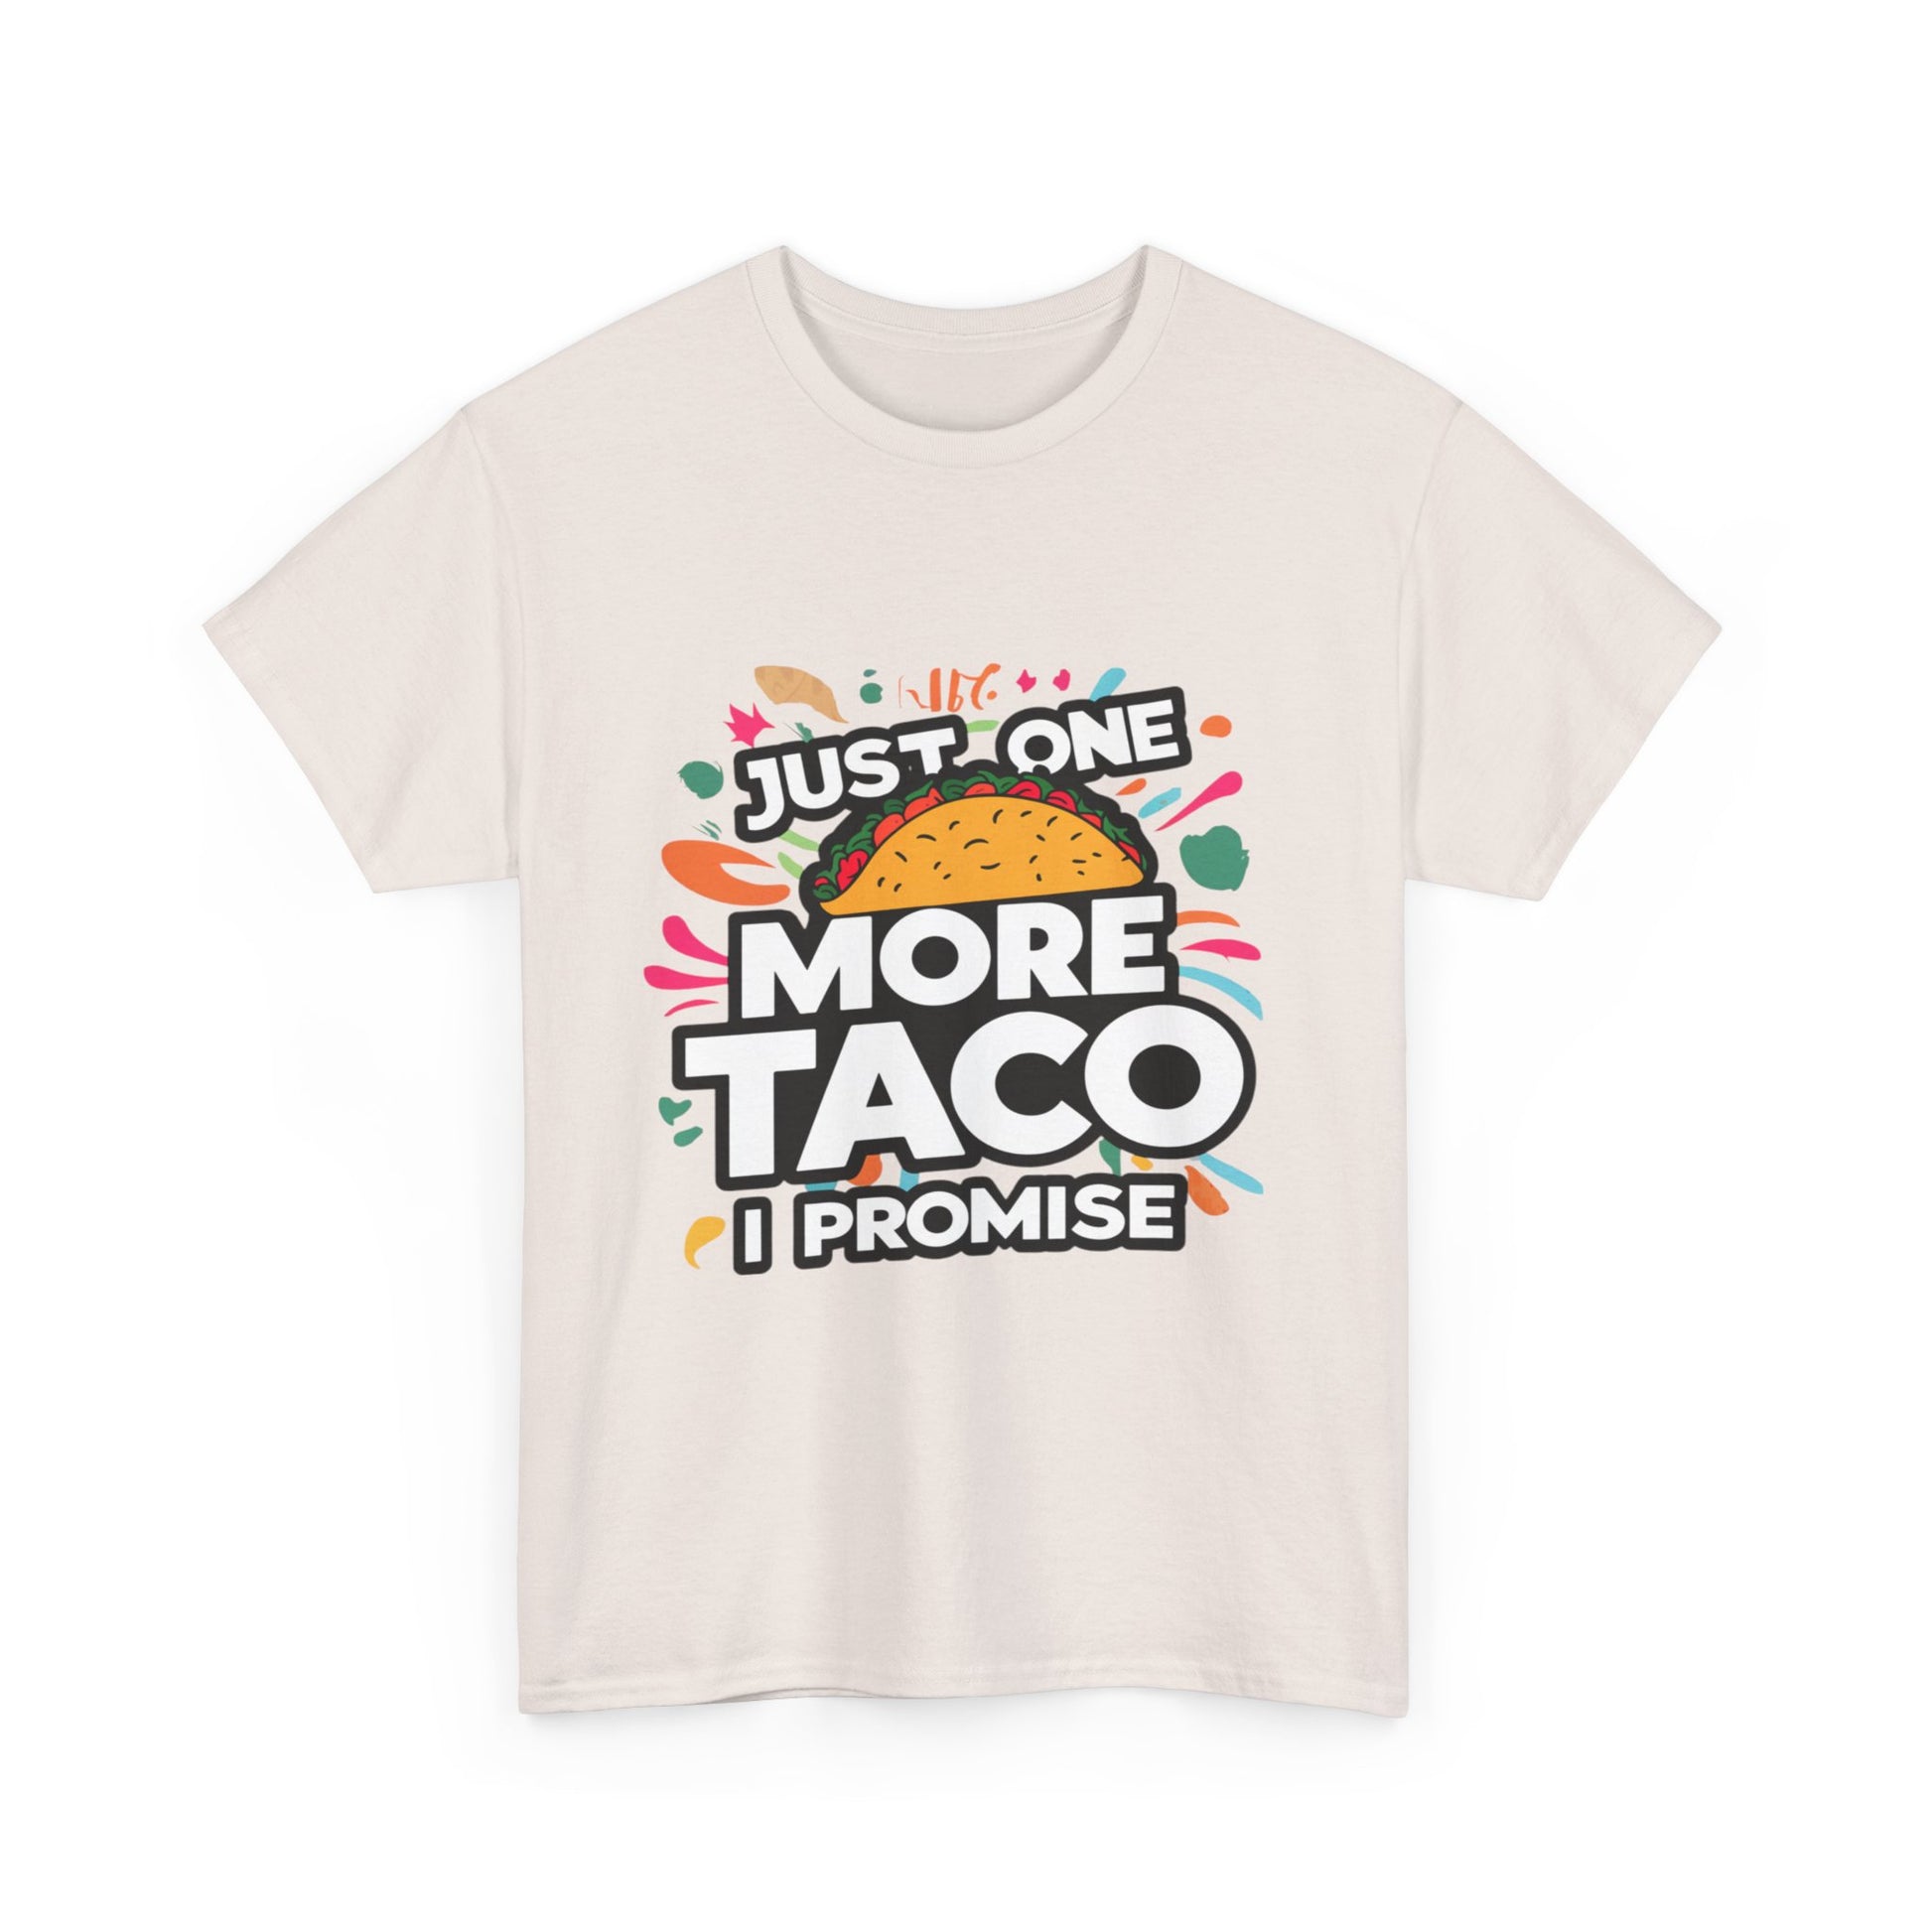 Just One More Taco I Promise Mexican Food Graphic Unisex Heavy Cotton Tee Cotton Funny Humorous Graphic Soft Premium Unisex Men Women Ice Gray T-shirt Birthday Gift-48